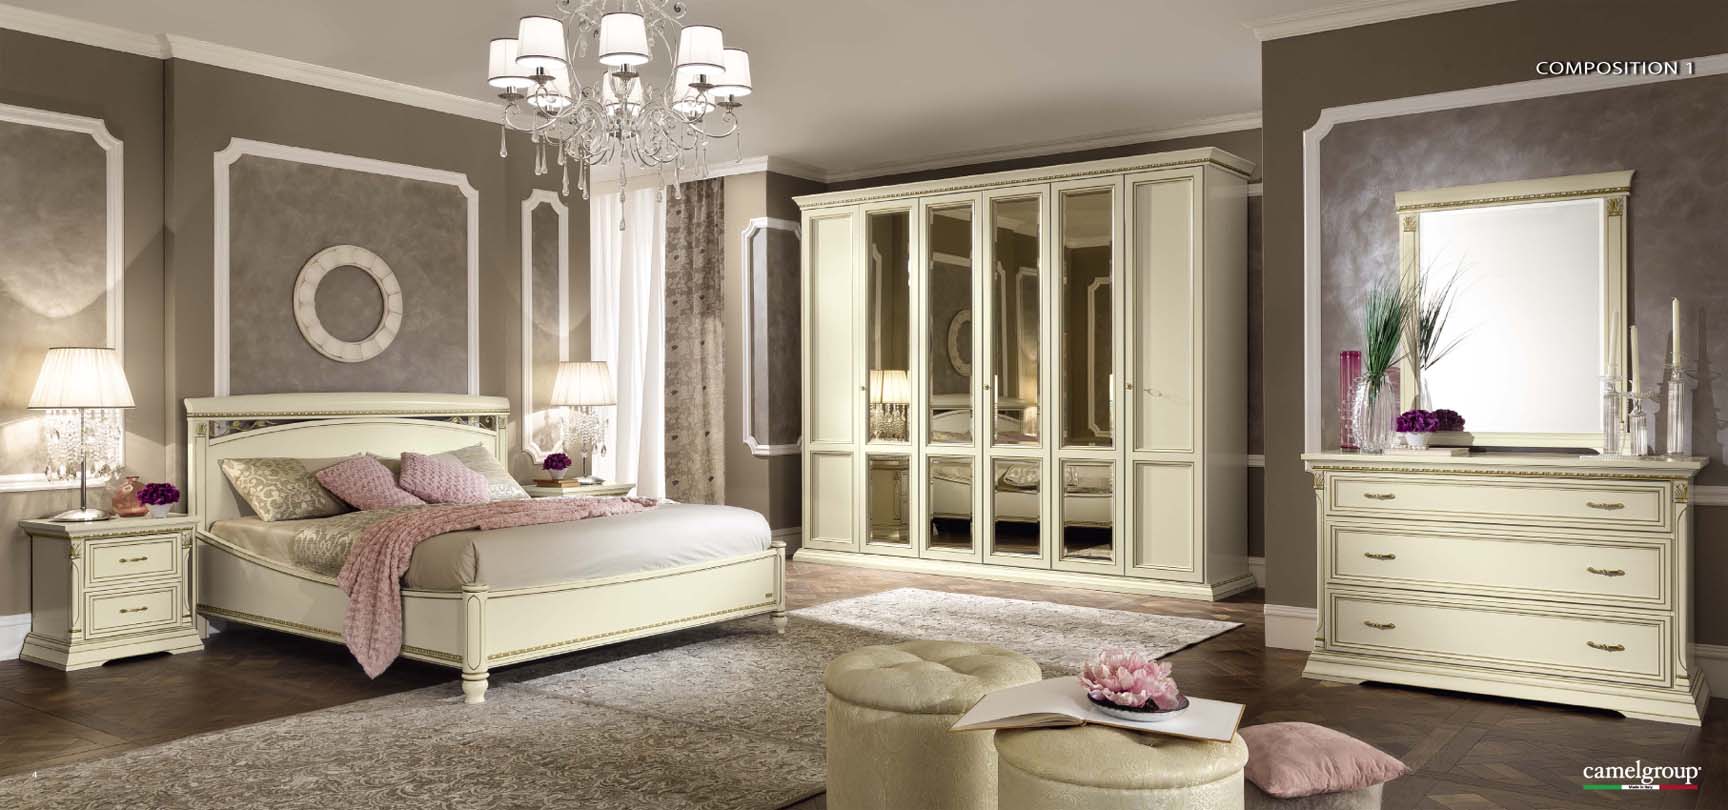 Bedroom Furniture Mirrors Treviso Night Composition 1 in White Ash